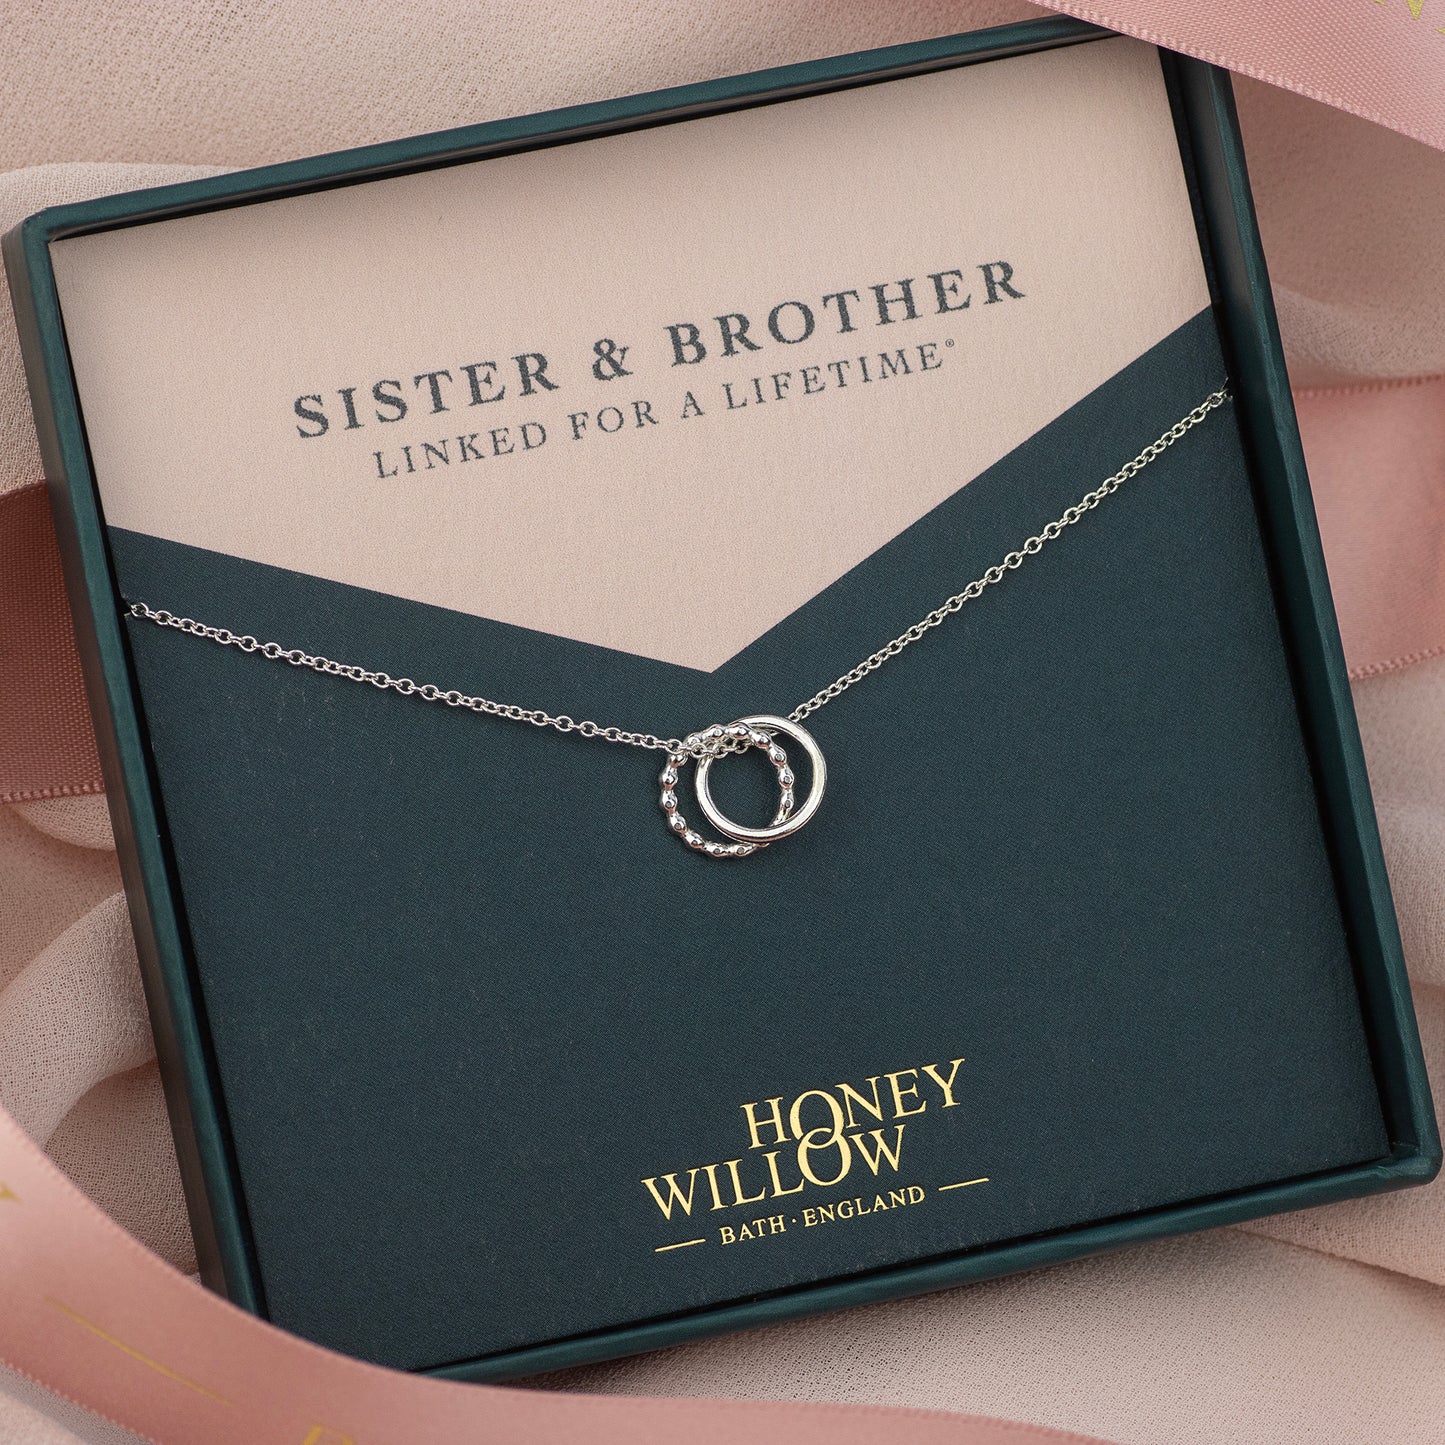 Gift for Sister from Brother - Silver Love Knot Necklace